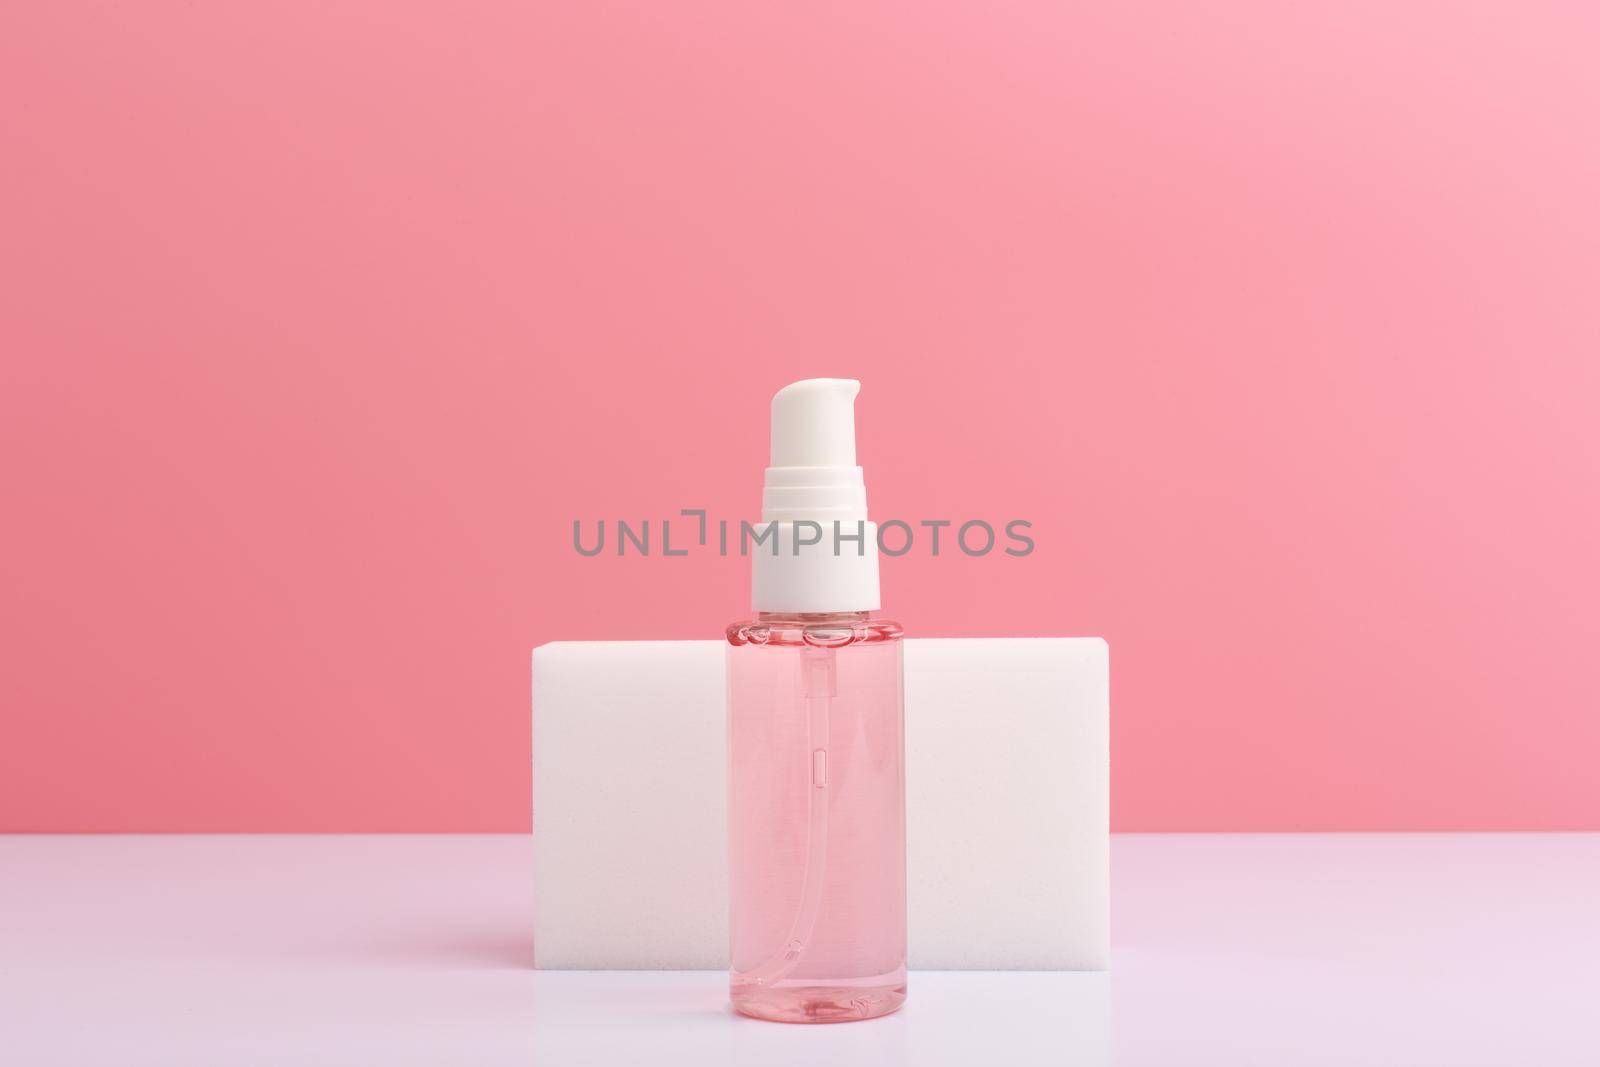 Cleansing and soothing foam or gel for face washing on white table against pink background with copy space. Concept of beauty products for daily skin care or anti acne treatment